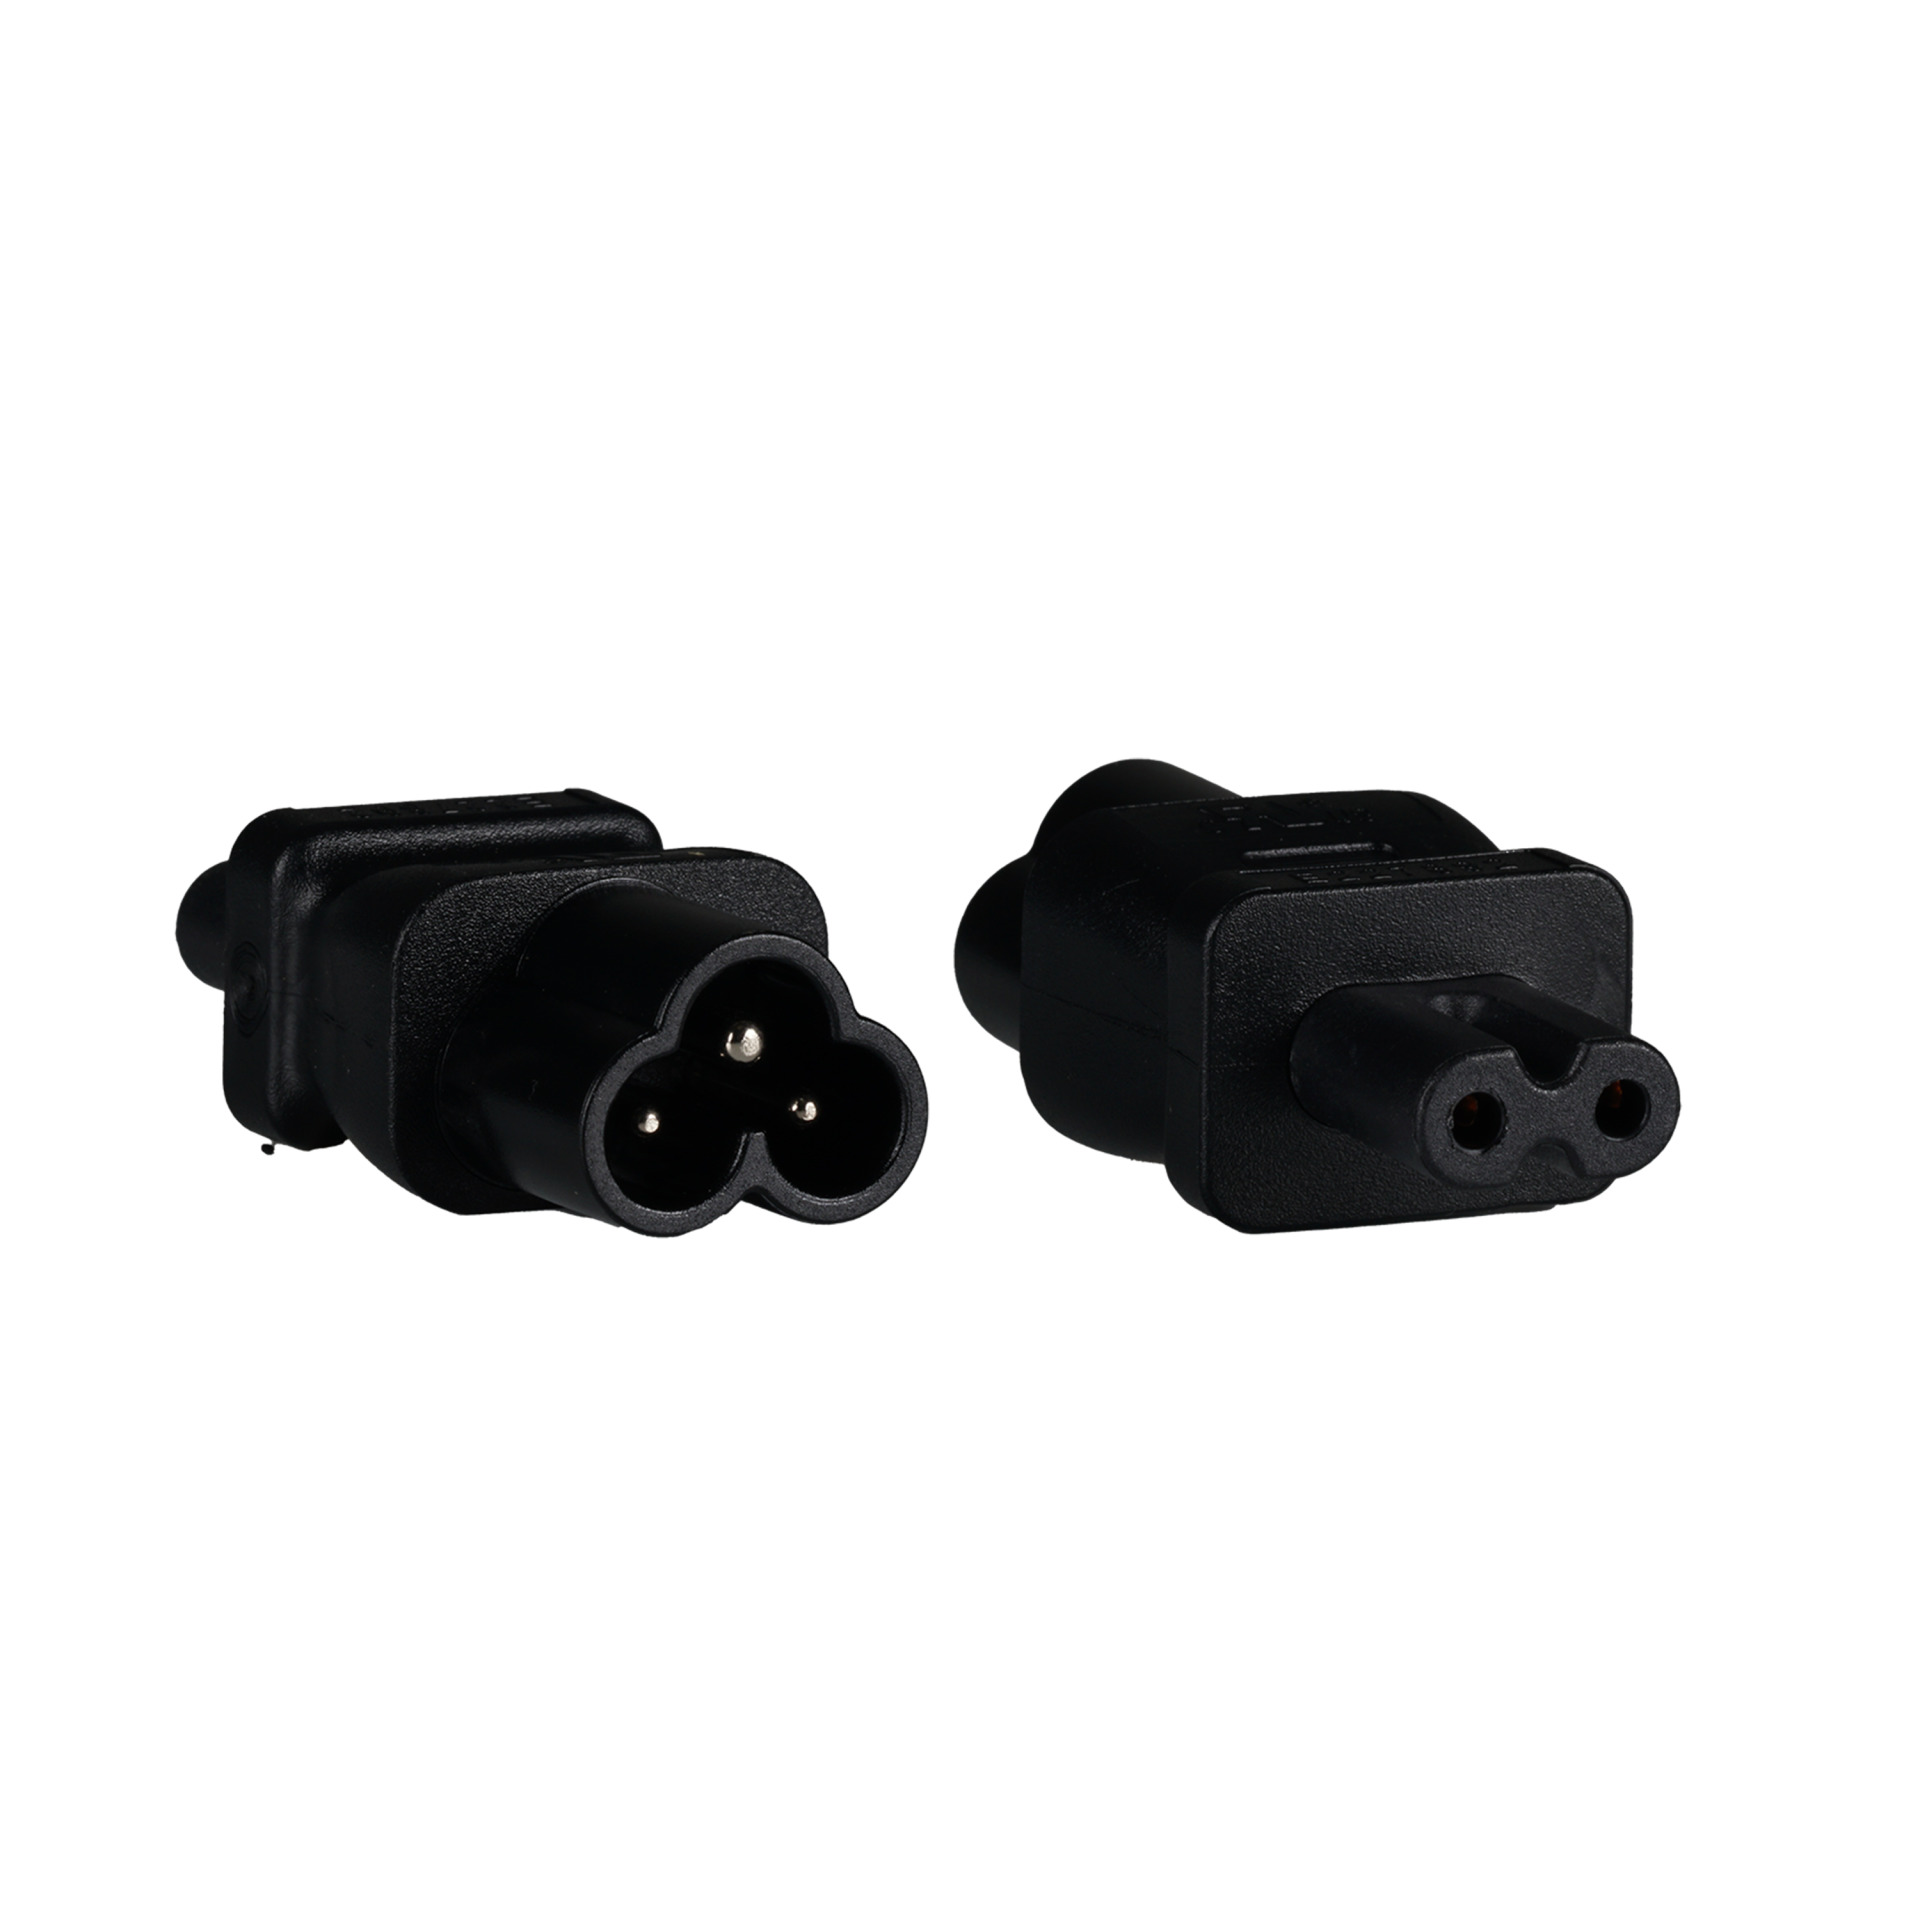 Mains adapter IEC C6 to IEC C7, Mickey Mouse plug - Euro 8 socket